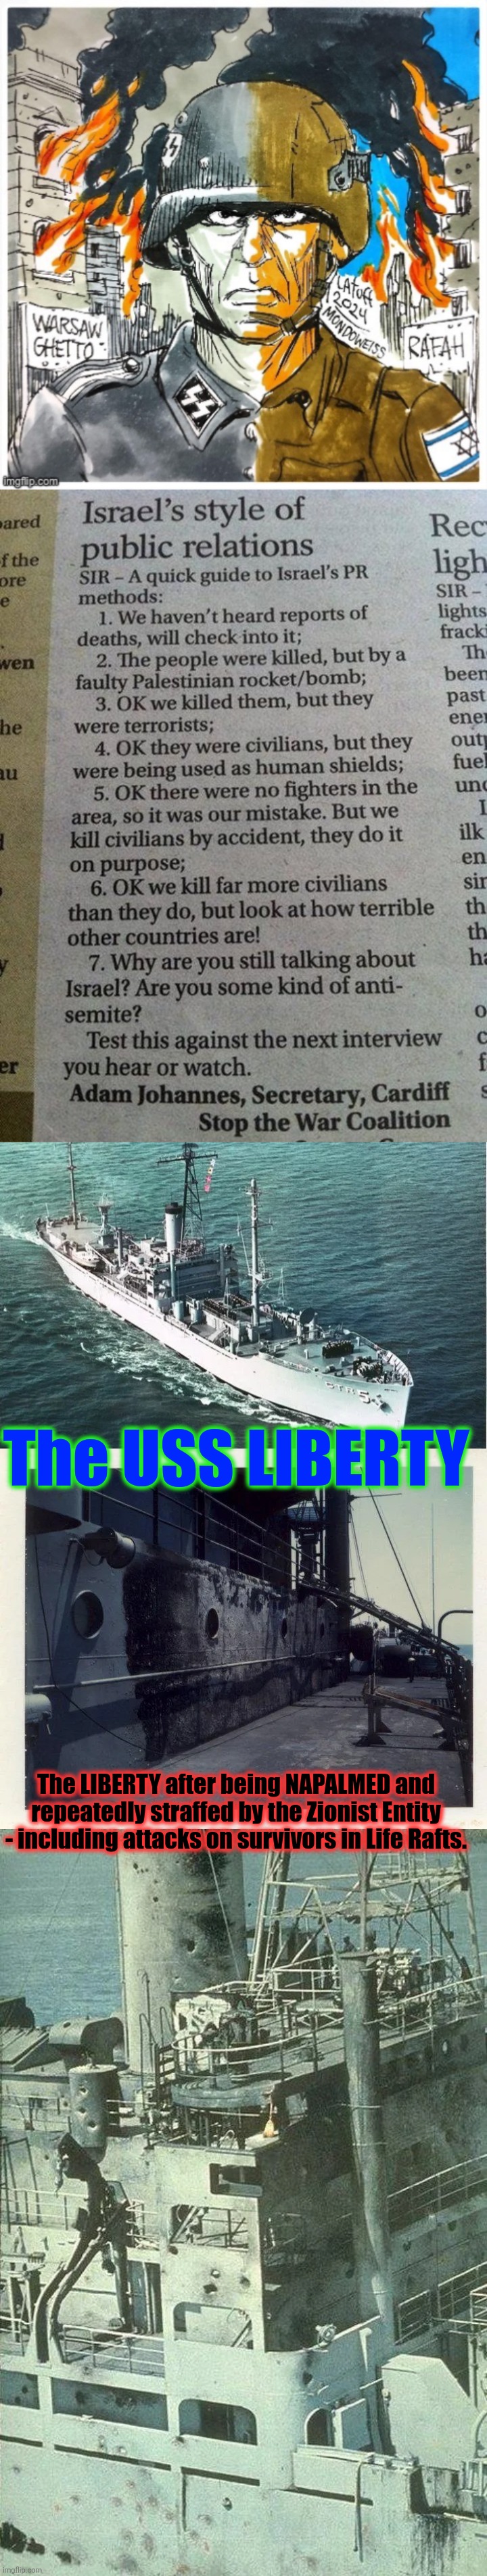 The USS LIBERTY The LIBERTY after being NAPALMED and repeatedly straffed by the Zionist Entity - including attacks on survivors in Life Raft | made w/ Imgflip meme maker